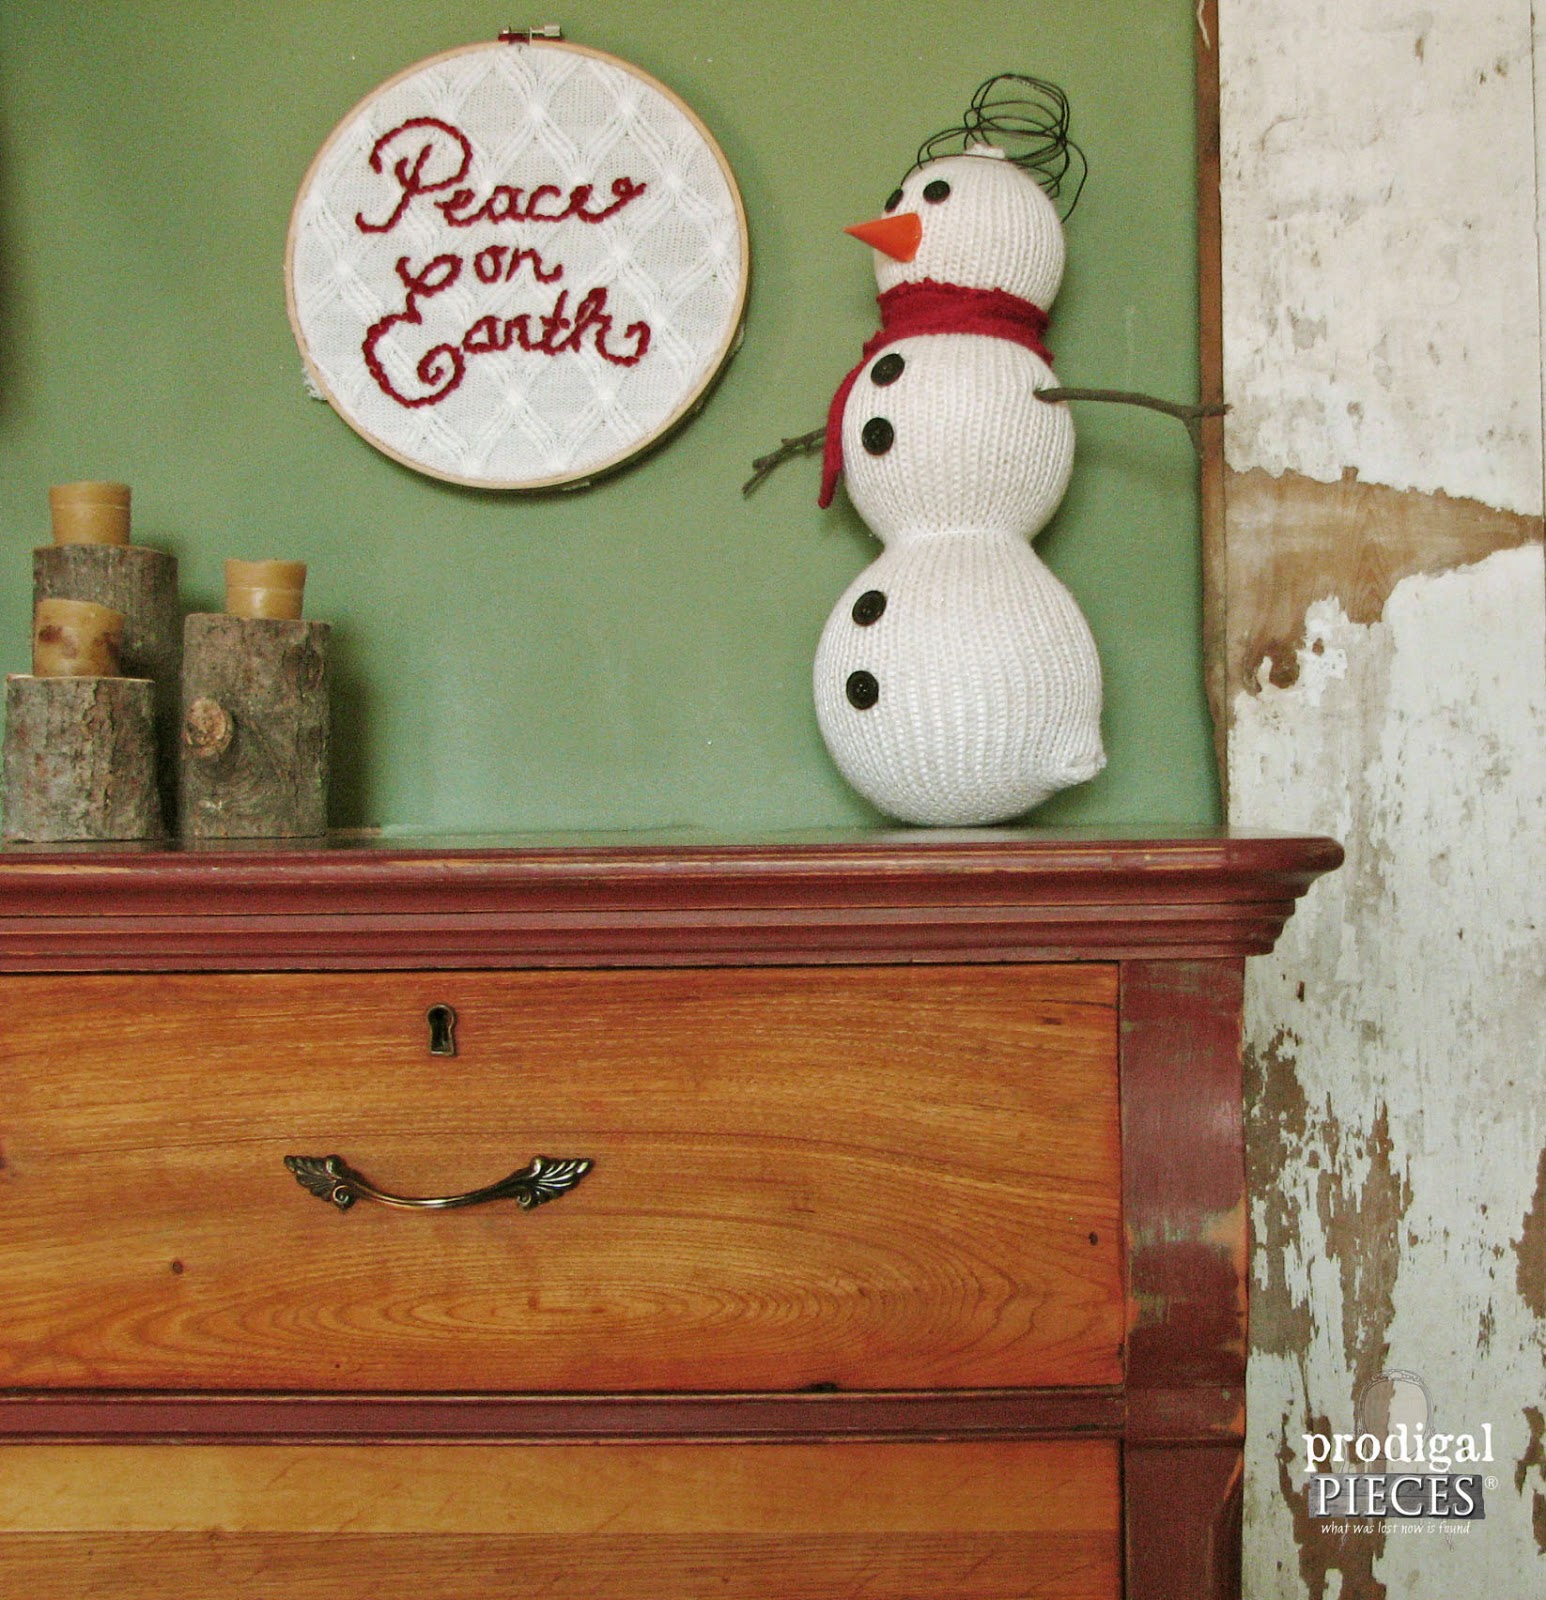 Themed Furniture Makeover Day ~ Rustic Red Farmhouse Cottage Chic Dresser by Prodigal Pieces www.prodigalpieces.com